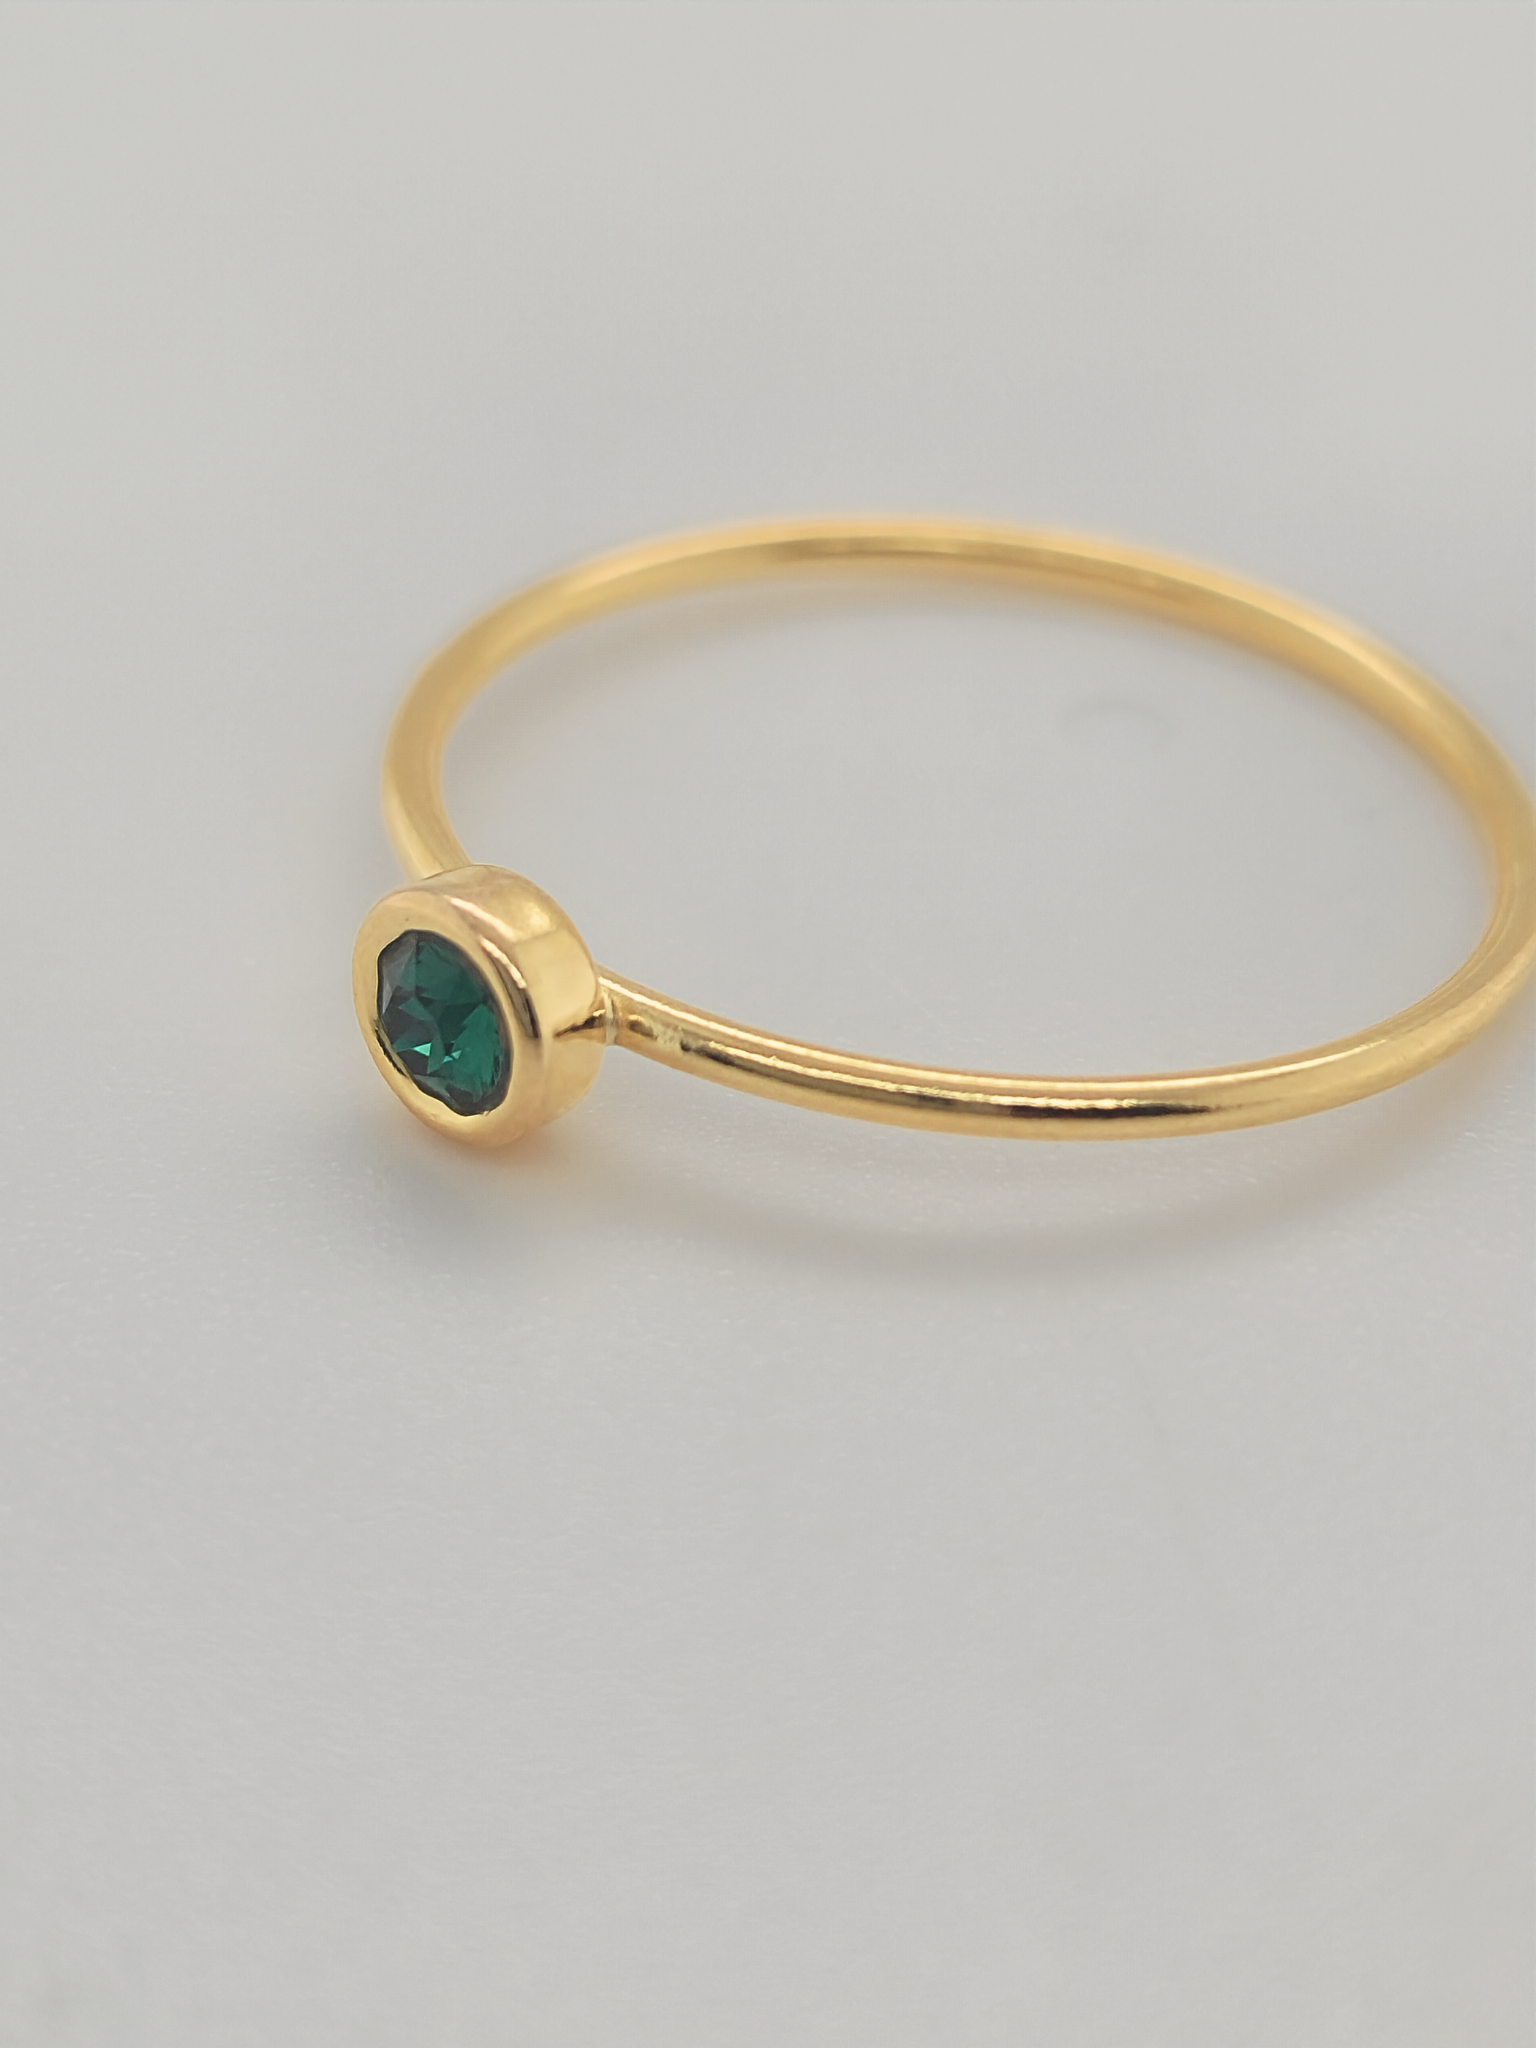 Large May Birthstone Ring - Going Golden